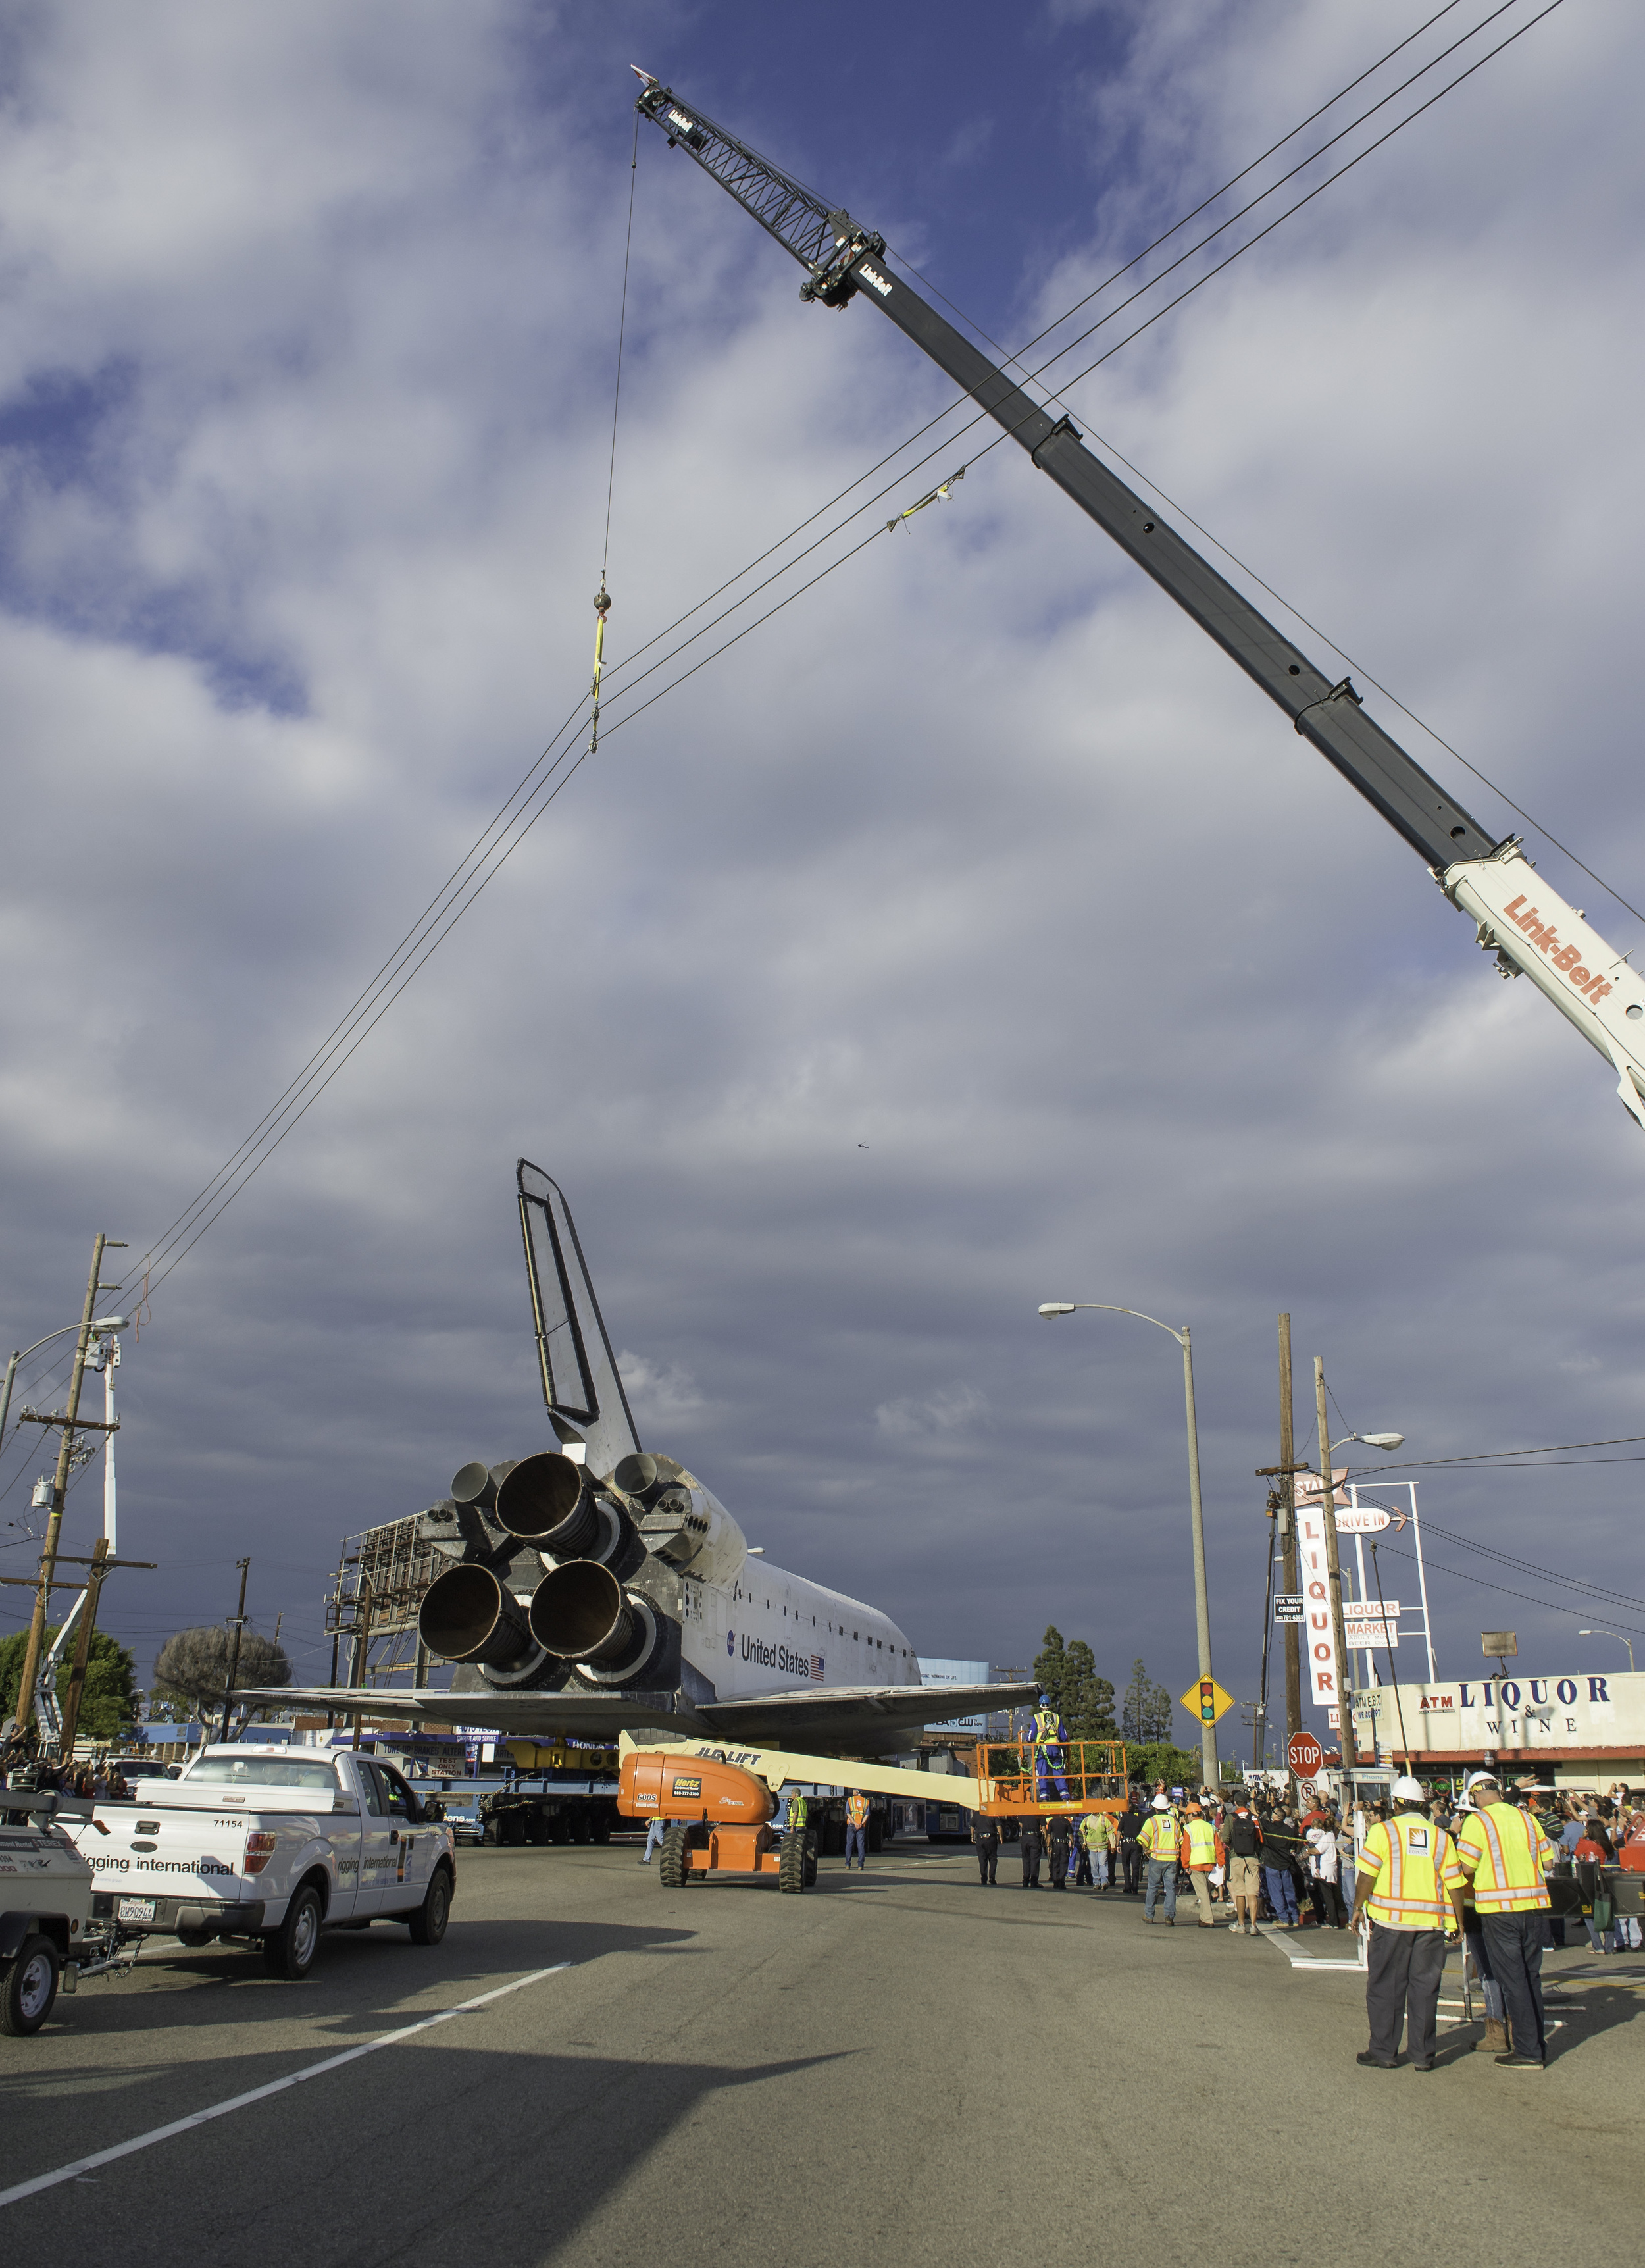  Power lines are hoisted upwards by a crane in order to allow the space shuttle Endeavour to traverse on its path to its new home at the California Science Center, Friday, Oct. 12, 2012 in Inglewood. Endeavour, built as a replacement for space shuttl